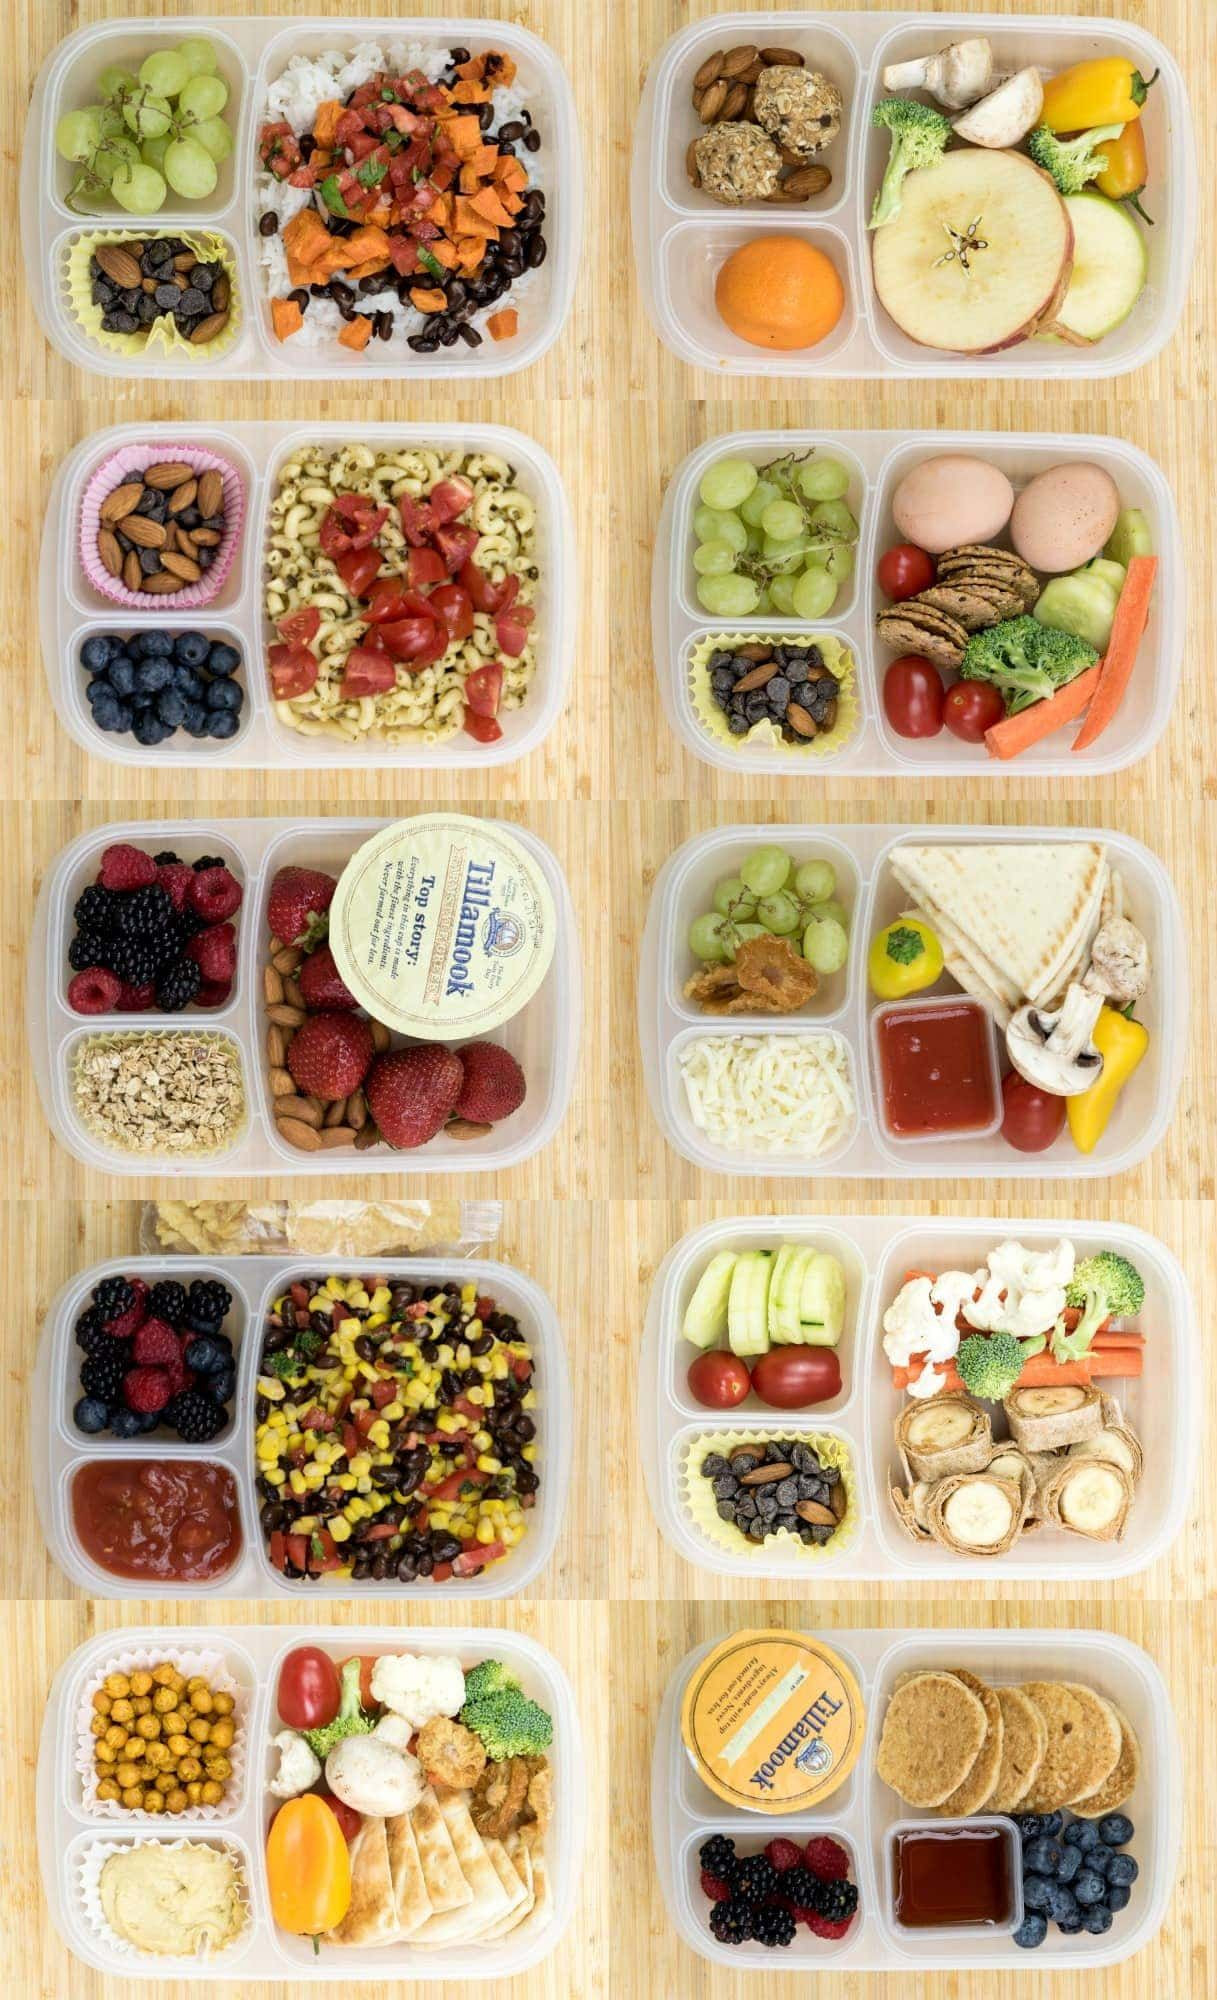 Healthy Snacks For Kids Lunch Boxes
 12 Healthy Lunch Box Ideas for Kids or Adults